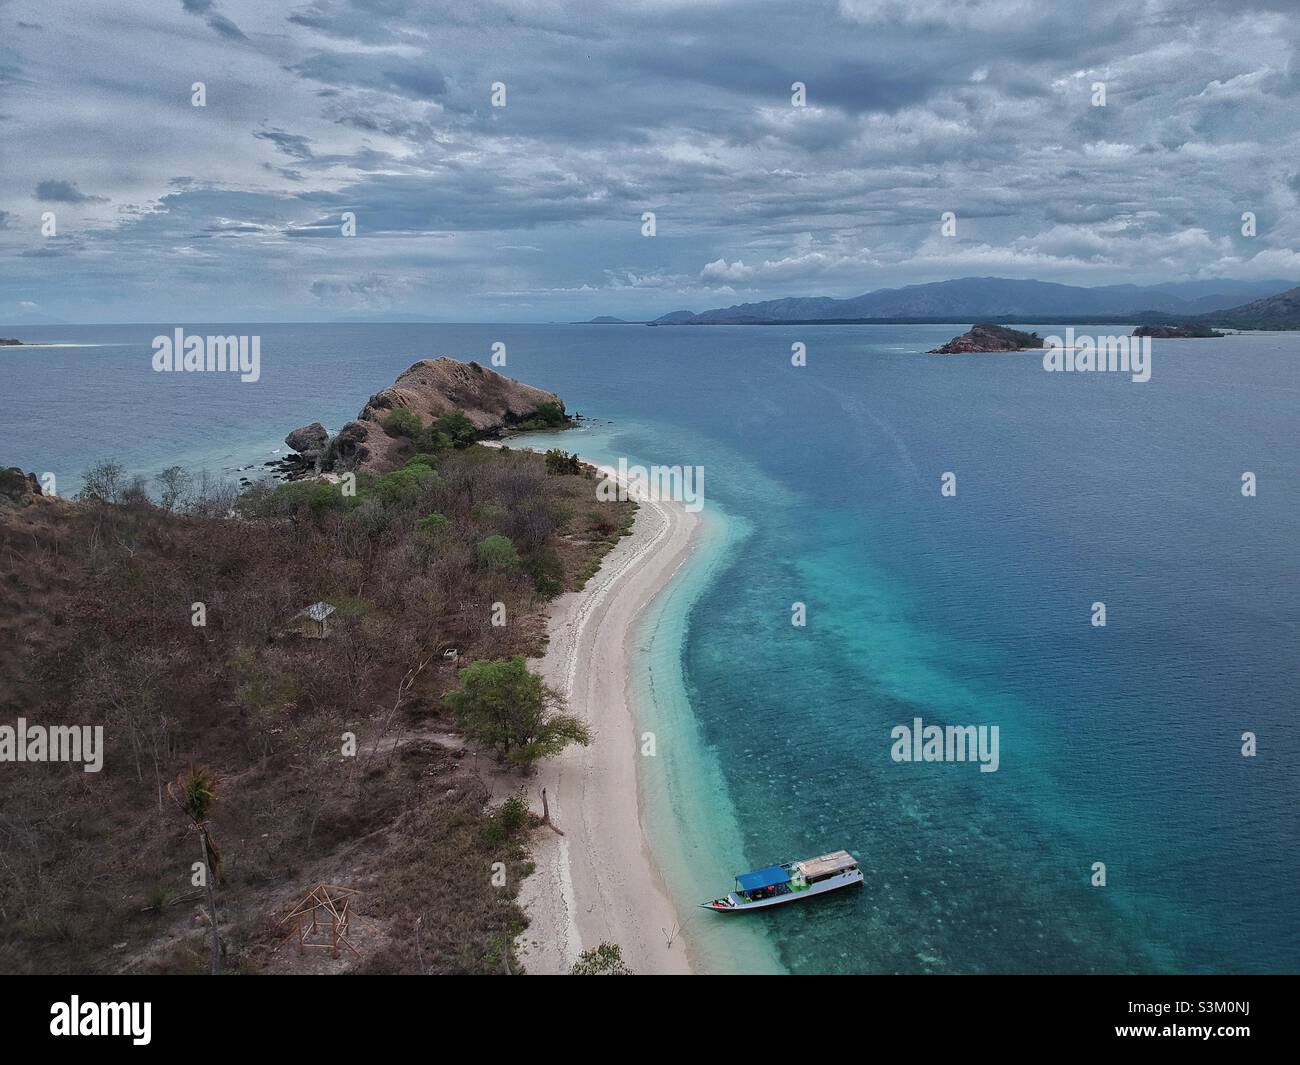 17 Islands or Pulau Tujuhbelas is a collection of actually more than twenty islets forming a marine park called ‘Taman Wisata Alam Laut 17 Pulau Riung’ on Flores’ northern coast Stock Photo